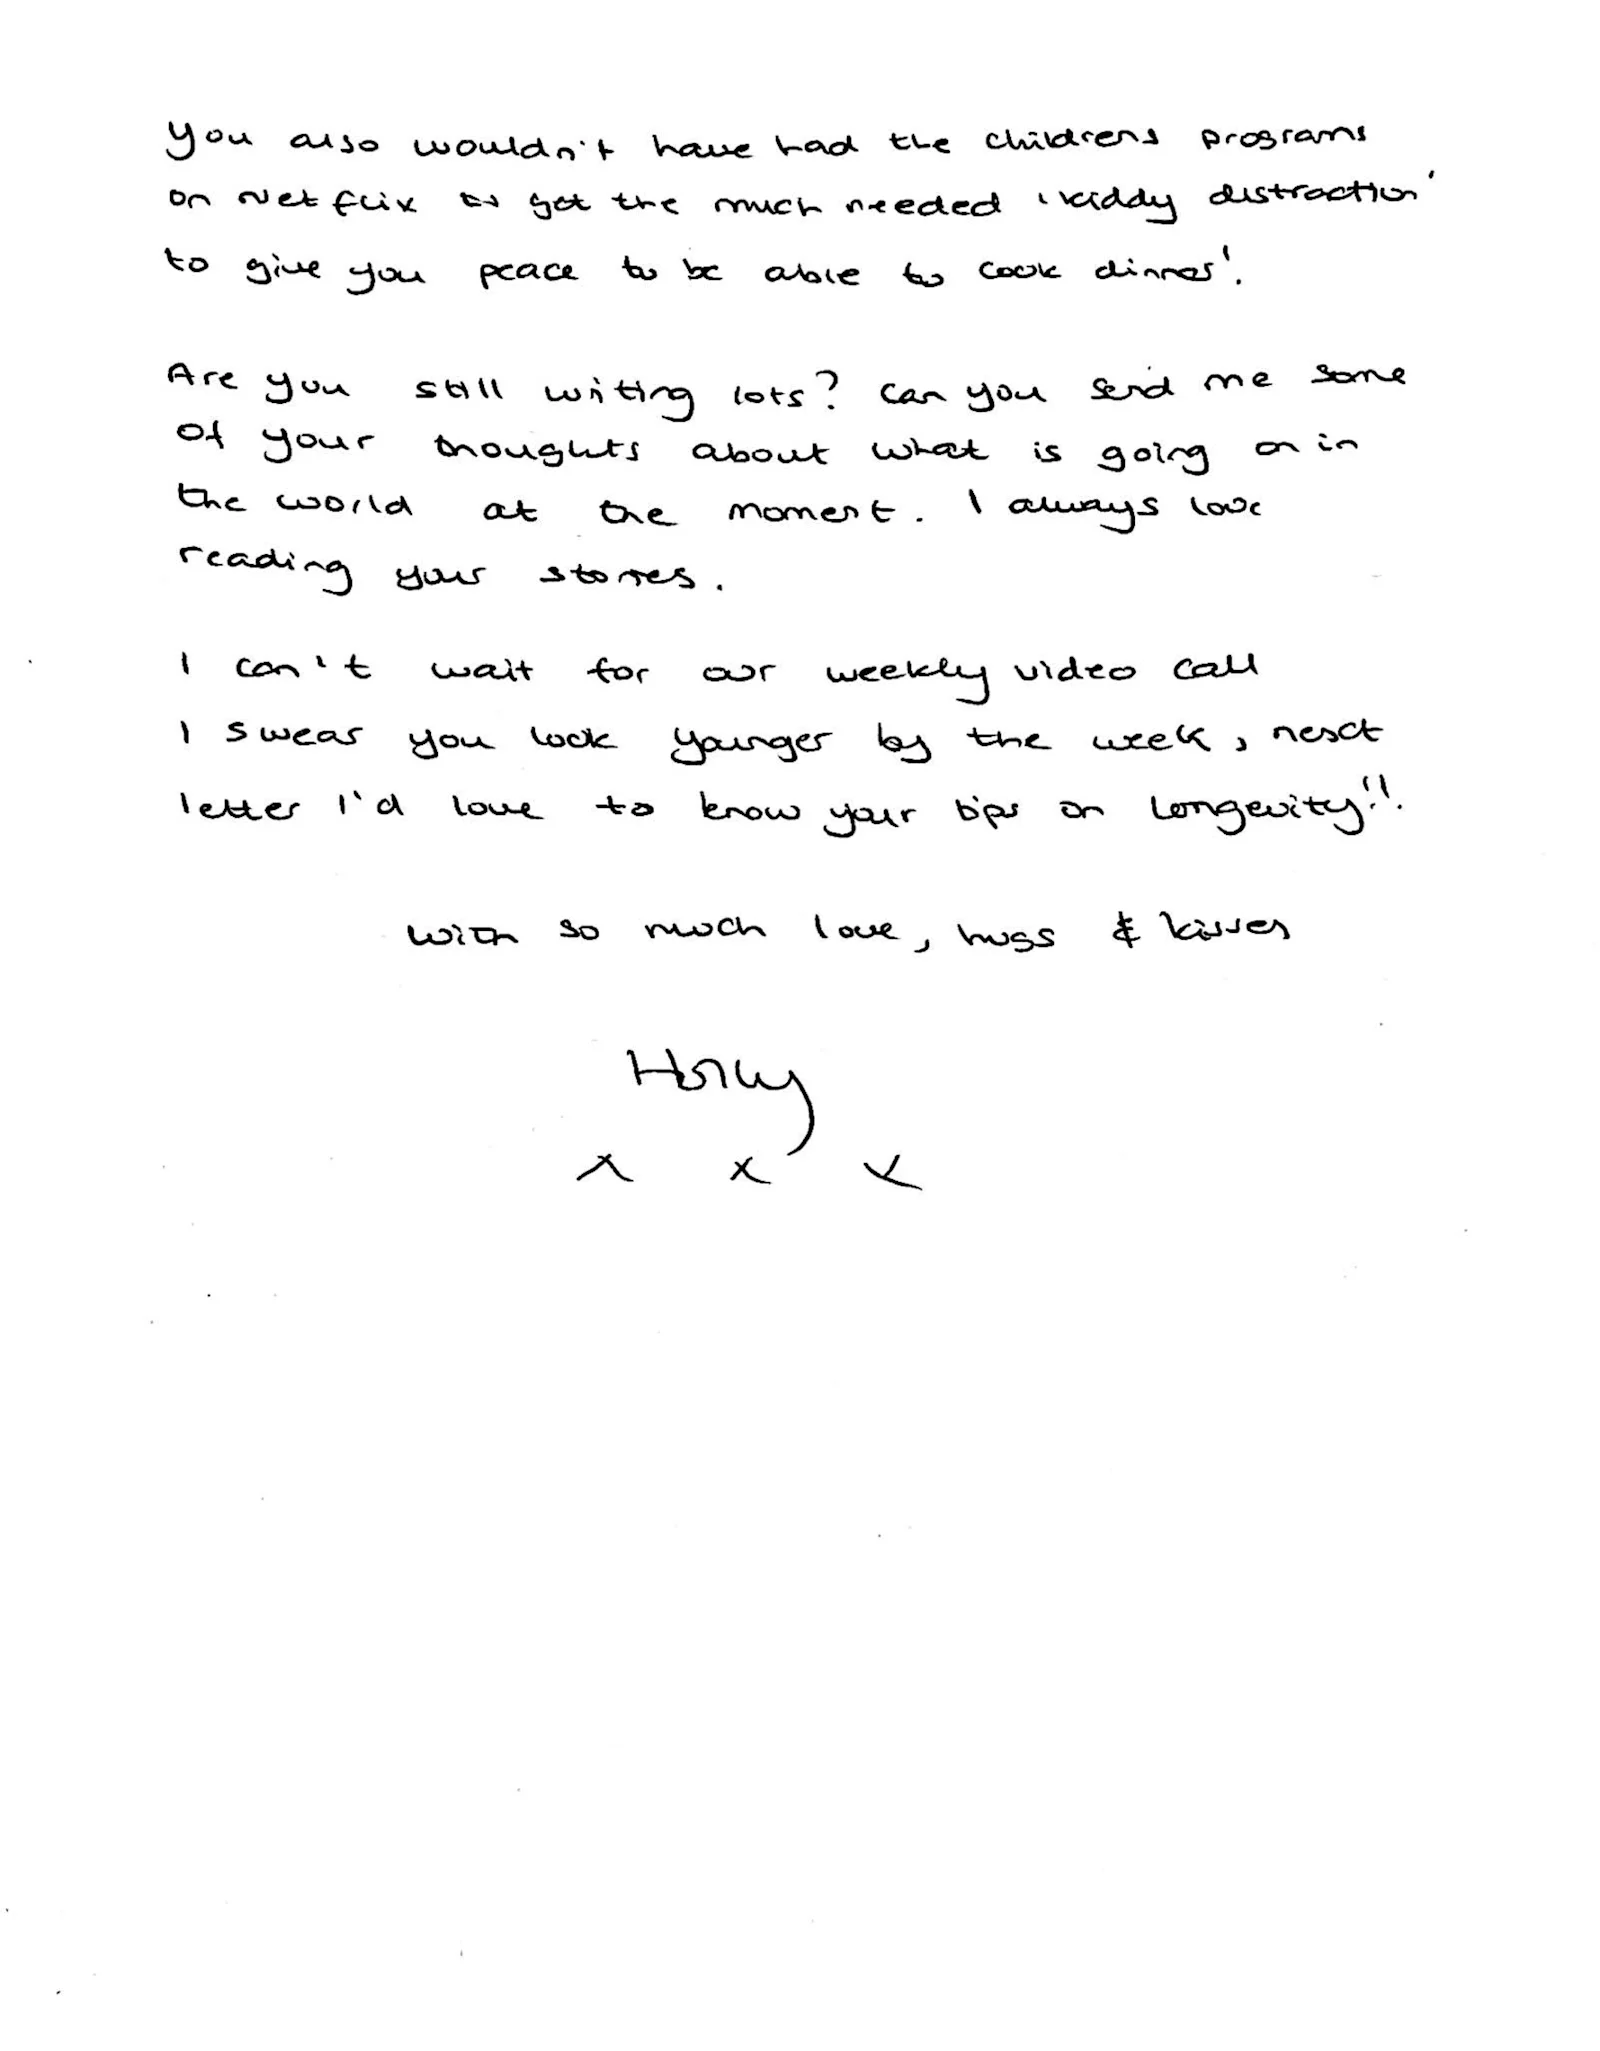 A handwritten letter from Holly Branson to Eve